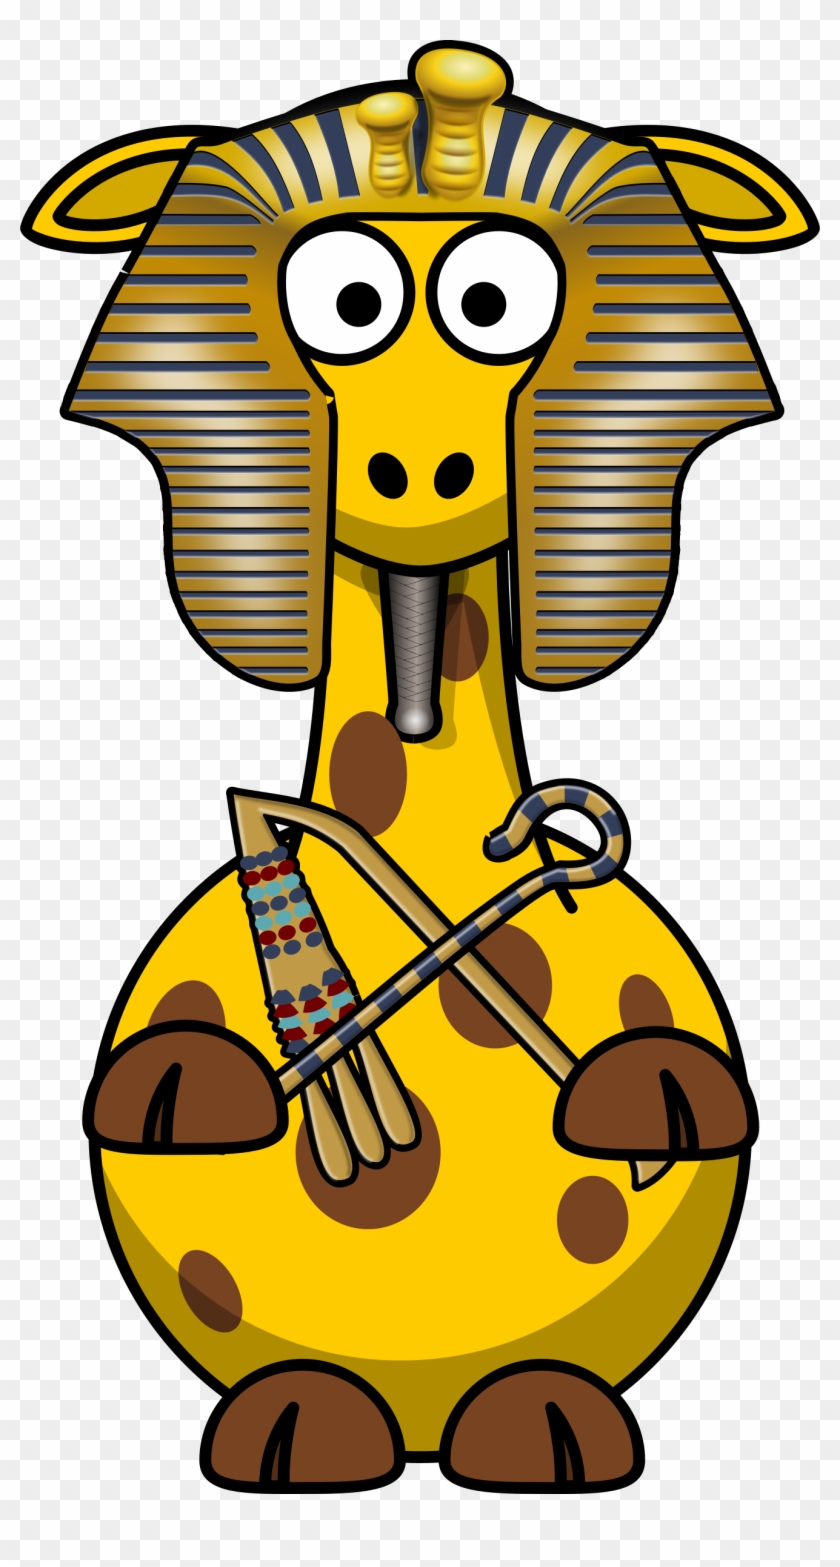 This Free Icons Png Design Of Giraffe Pharao Clipart #697823